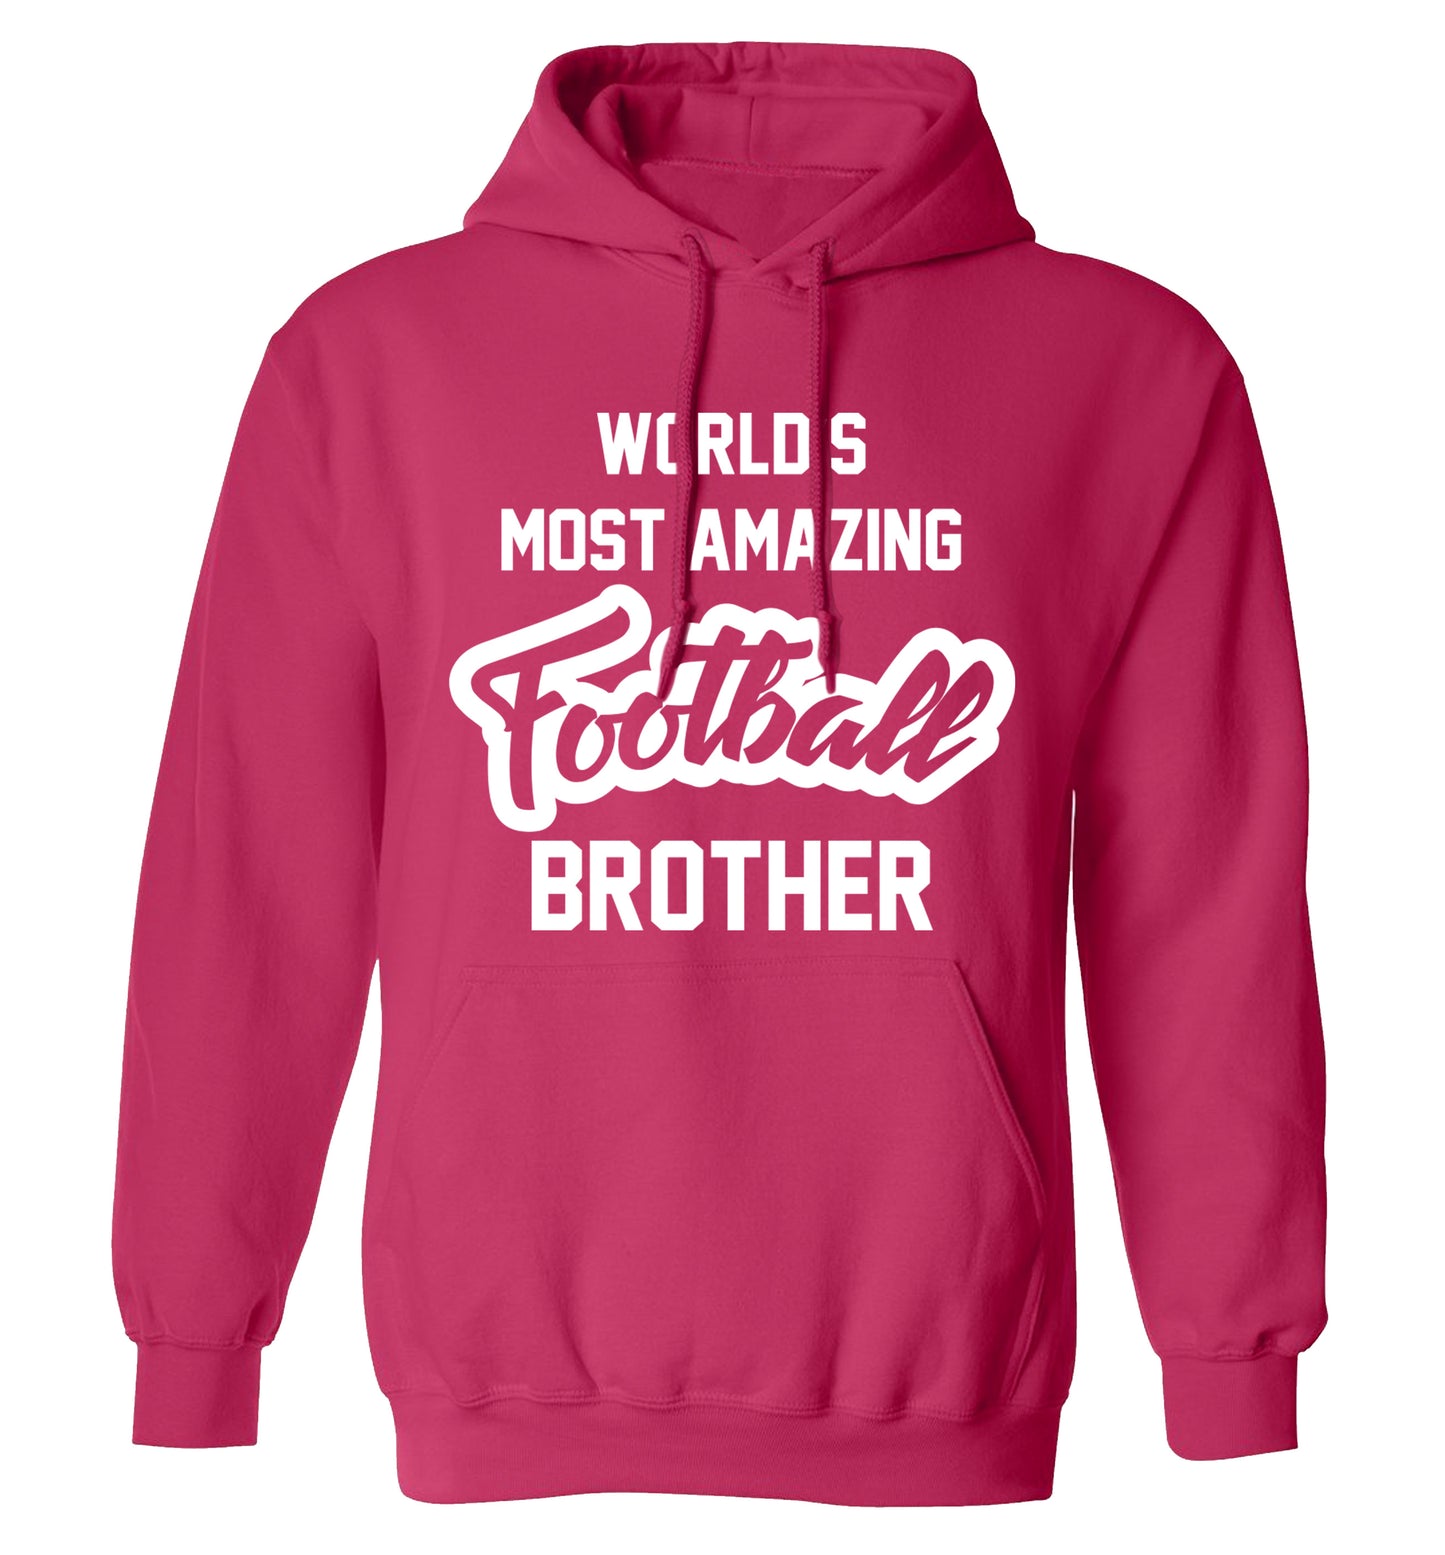 Worlds most amazing football brother adults unisexpink hoodie 2XL